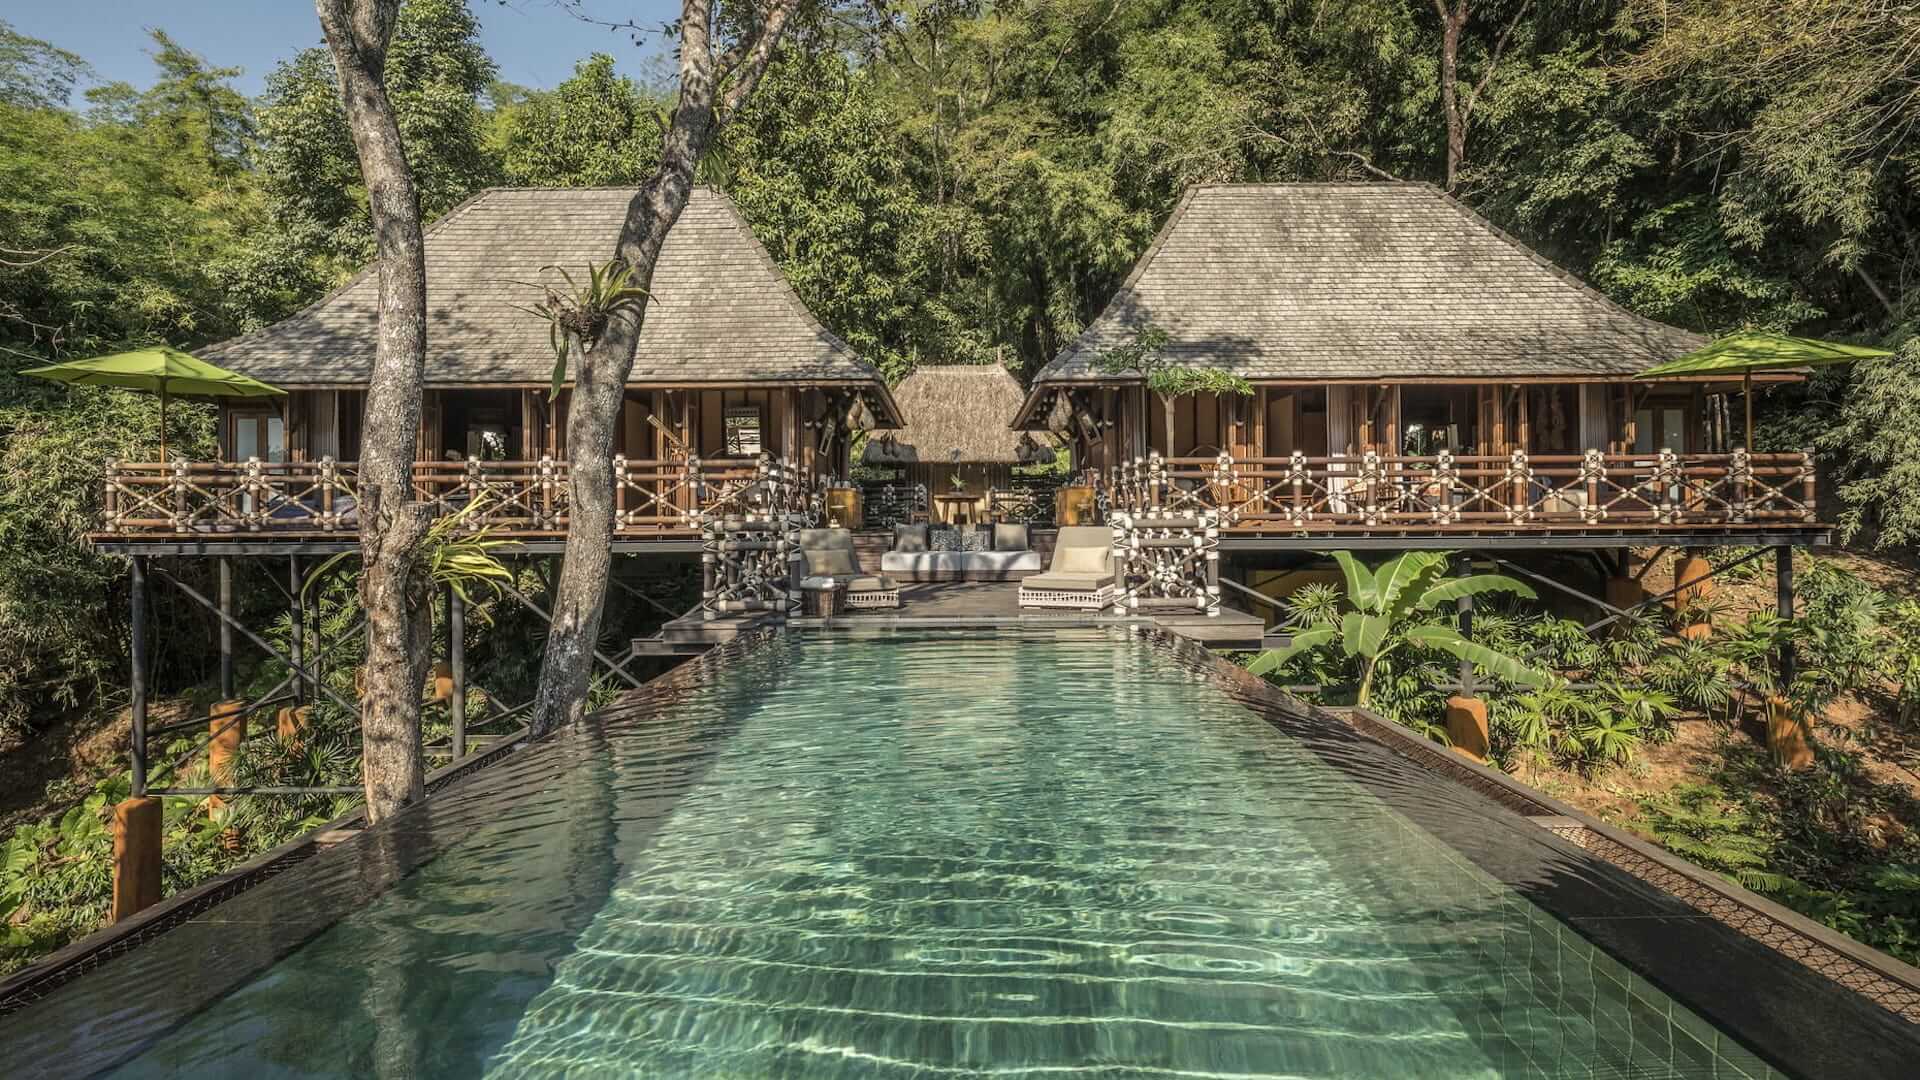 One of These Thailand Hotels Is Expected to be the Filming Location for 'The White Lotus' Season Three